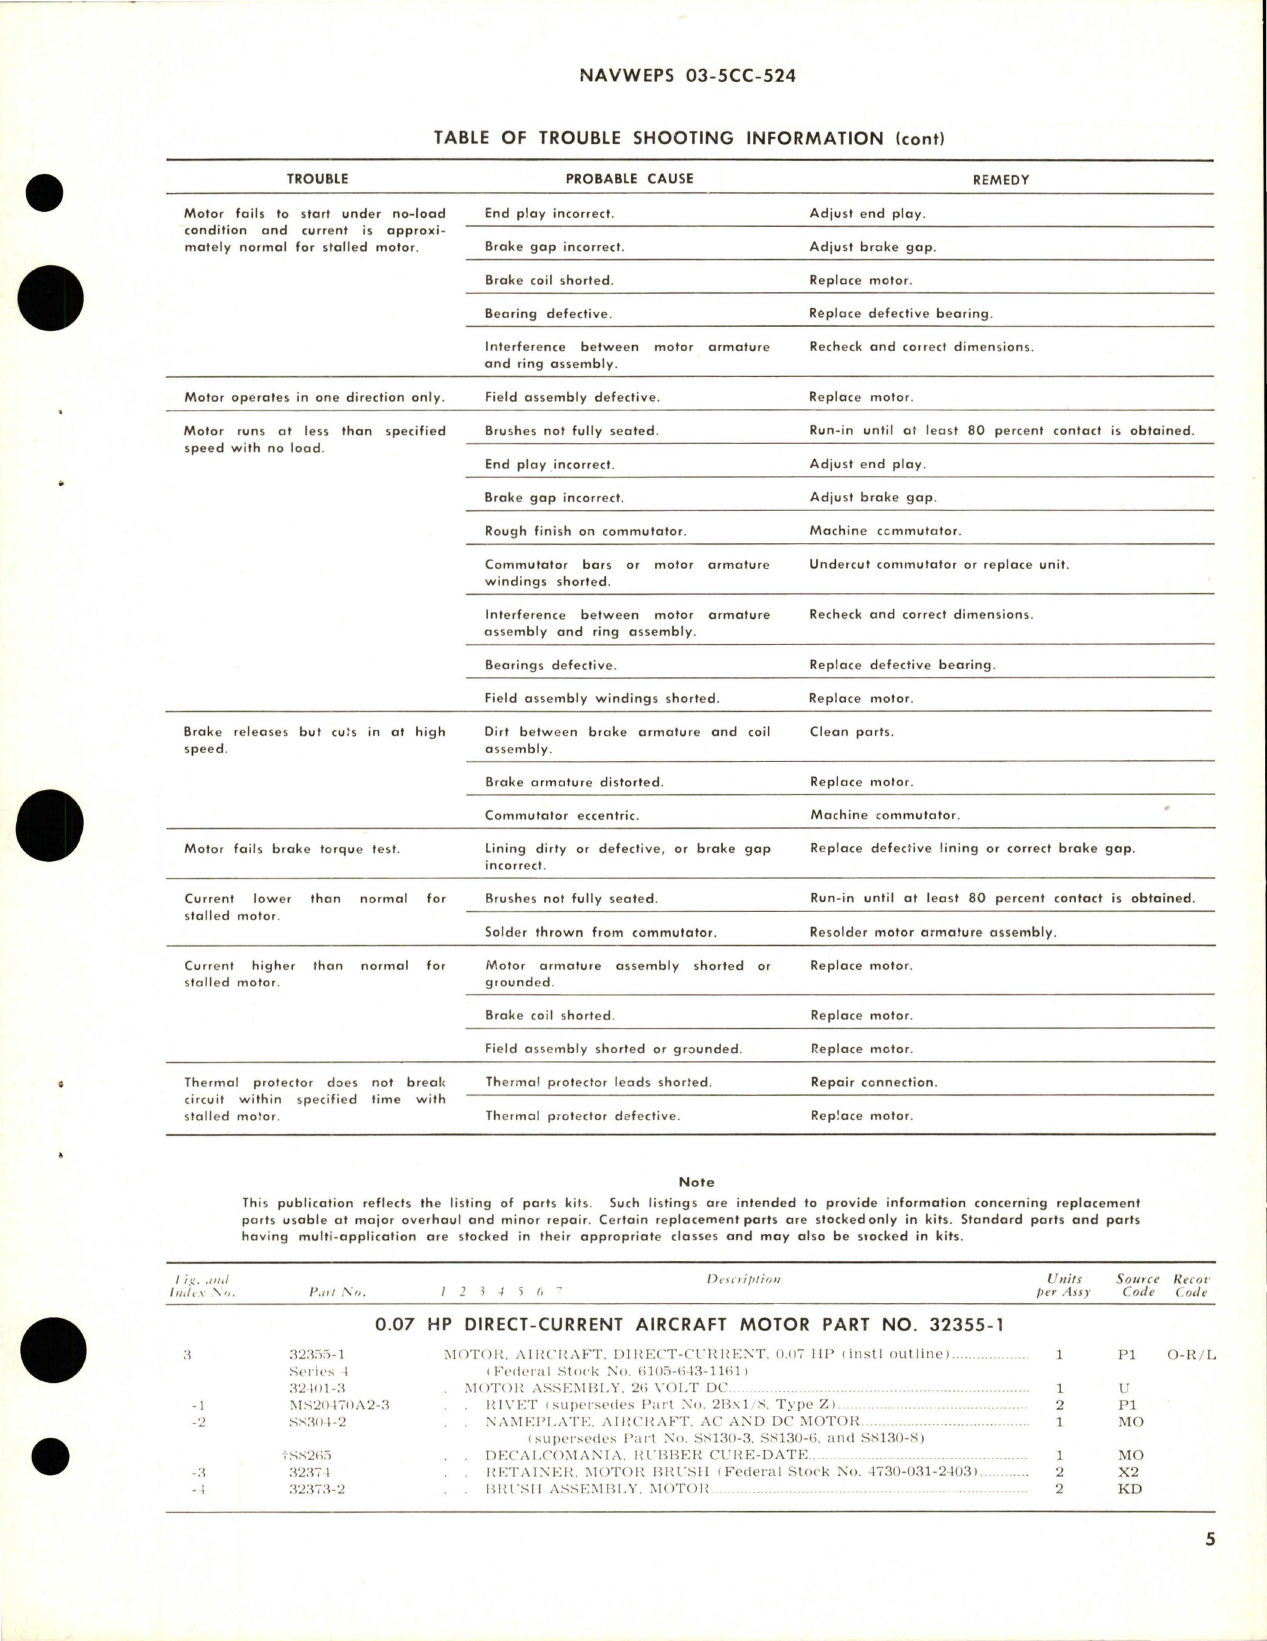 Sample page 5 from AirCorps Library document: Overhaul Instructions with Parts Breakdown for Direct-Current Aircraft Motor 0.07HP - Part 32355-1